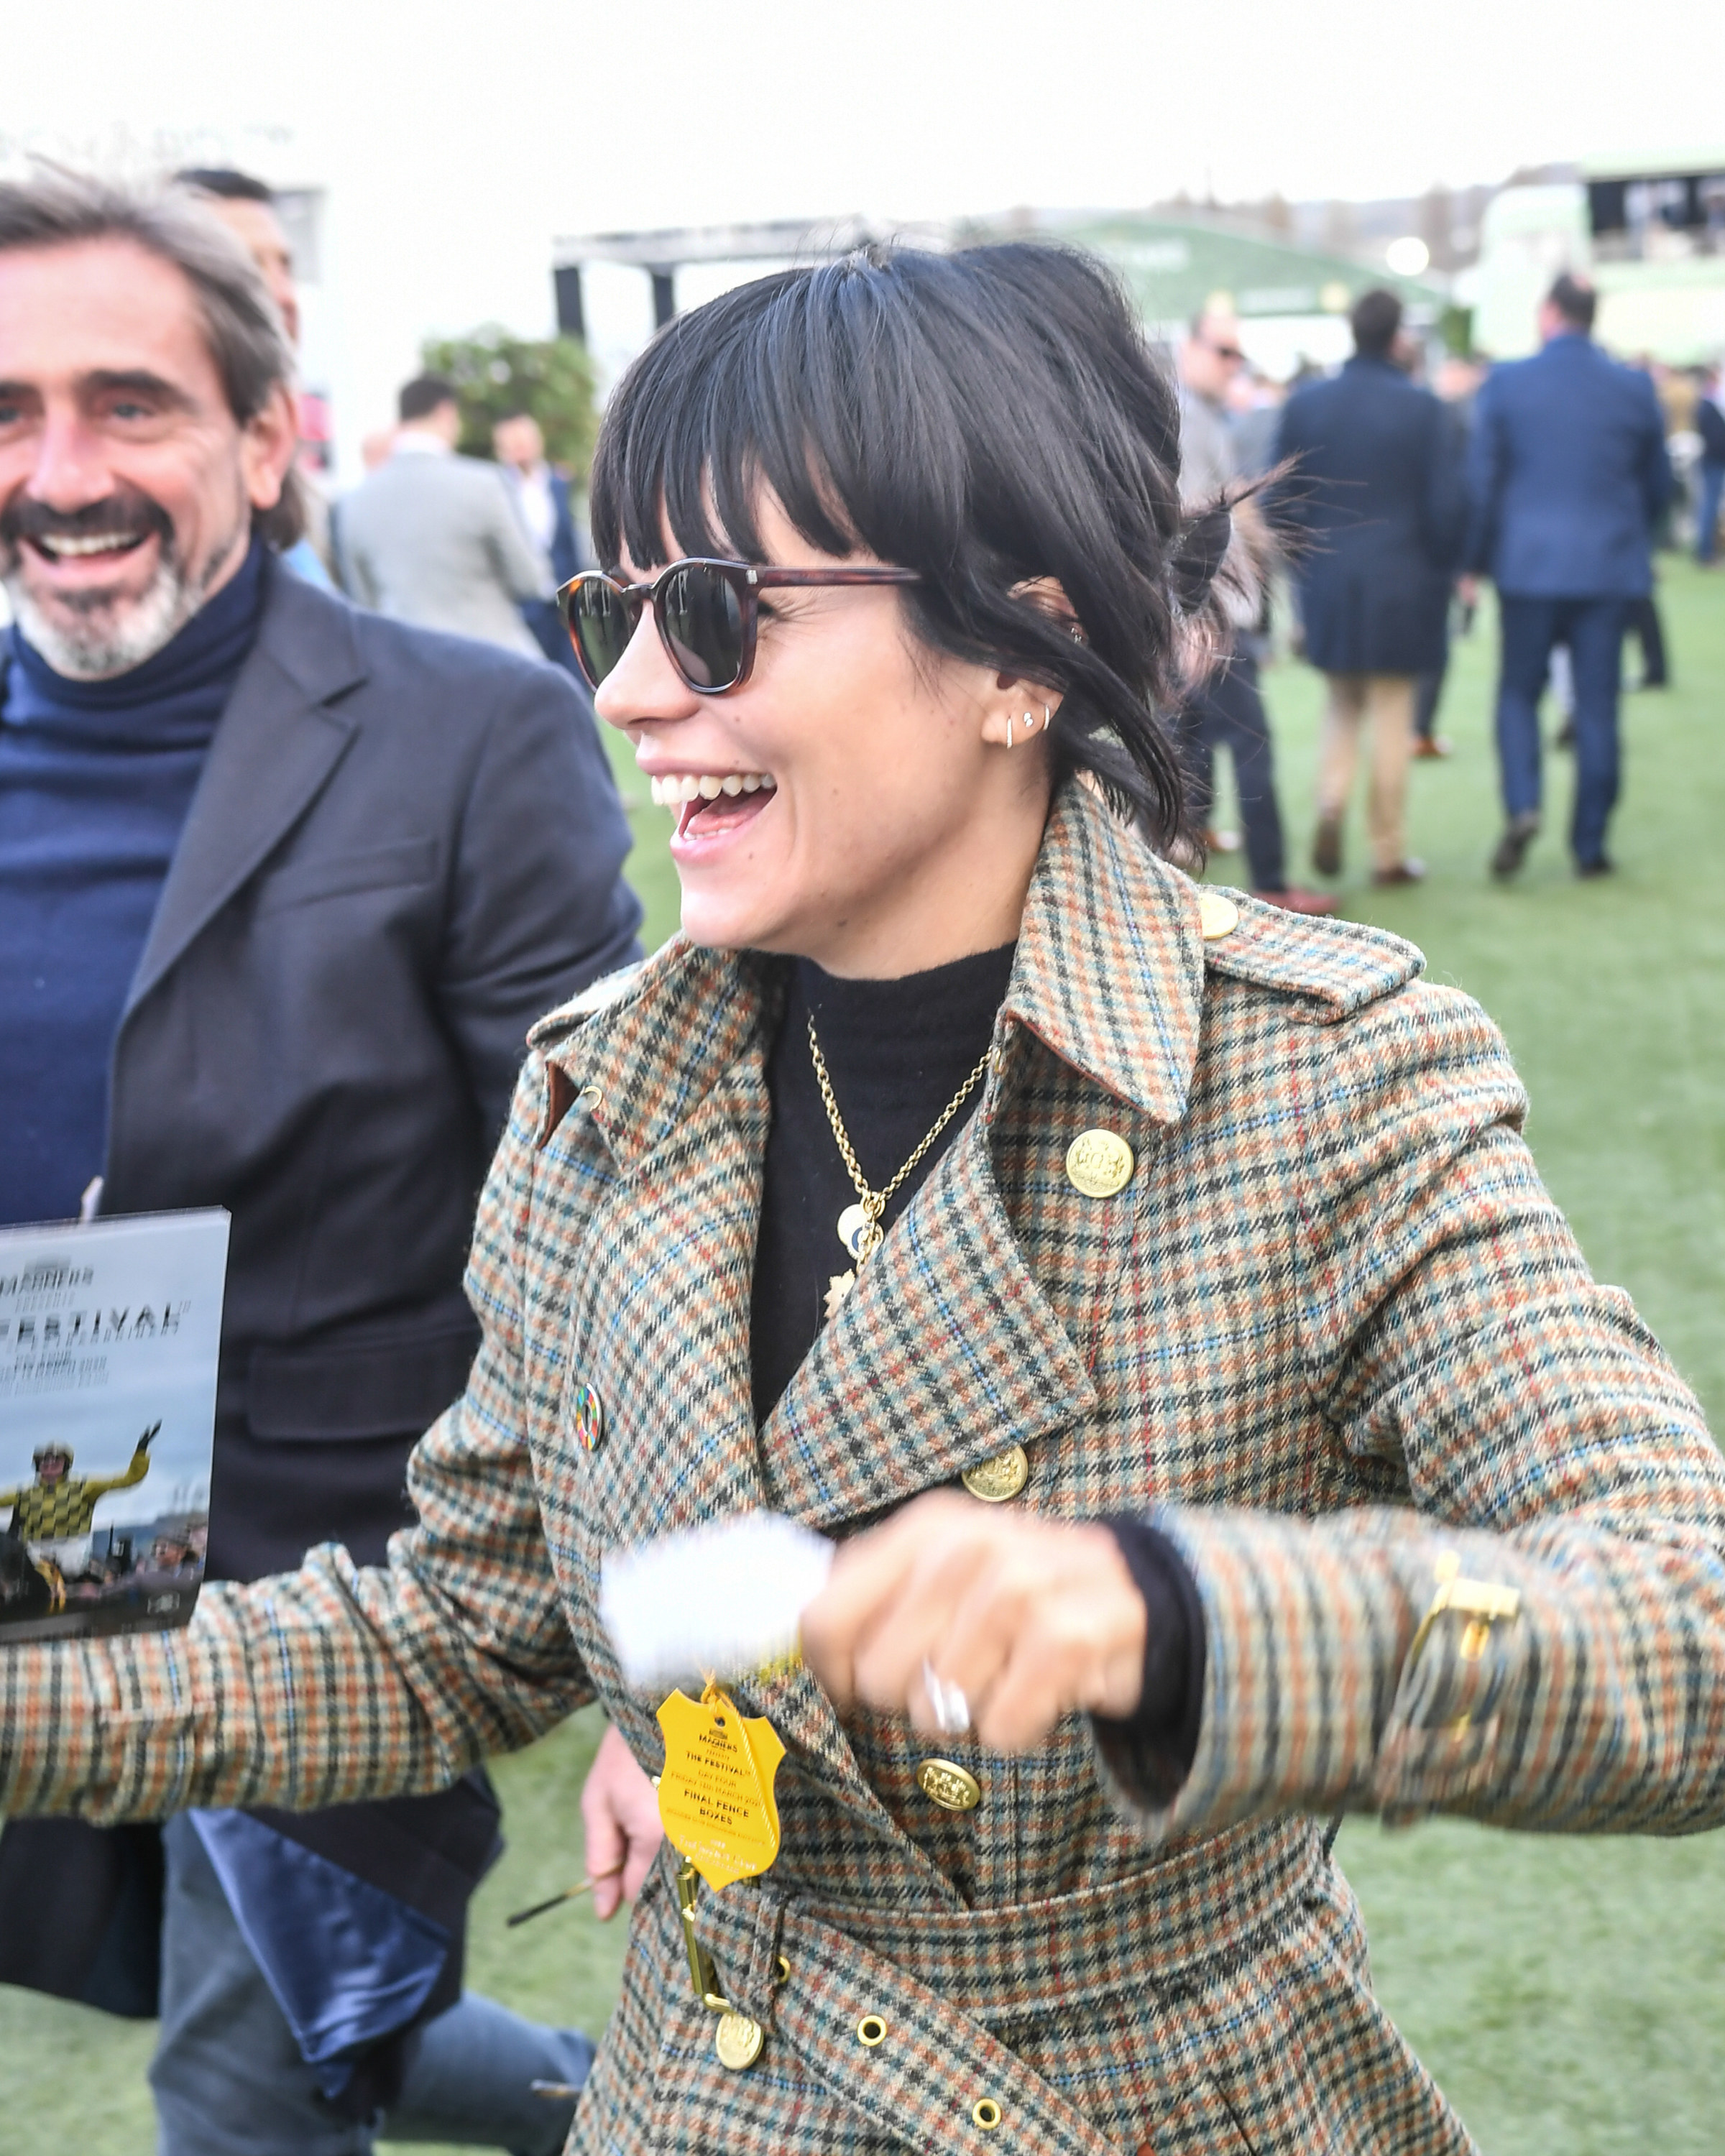 Lilly Allen is pictured smiling at a horse racing festival in 2020